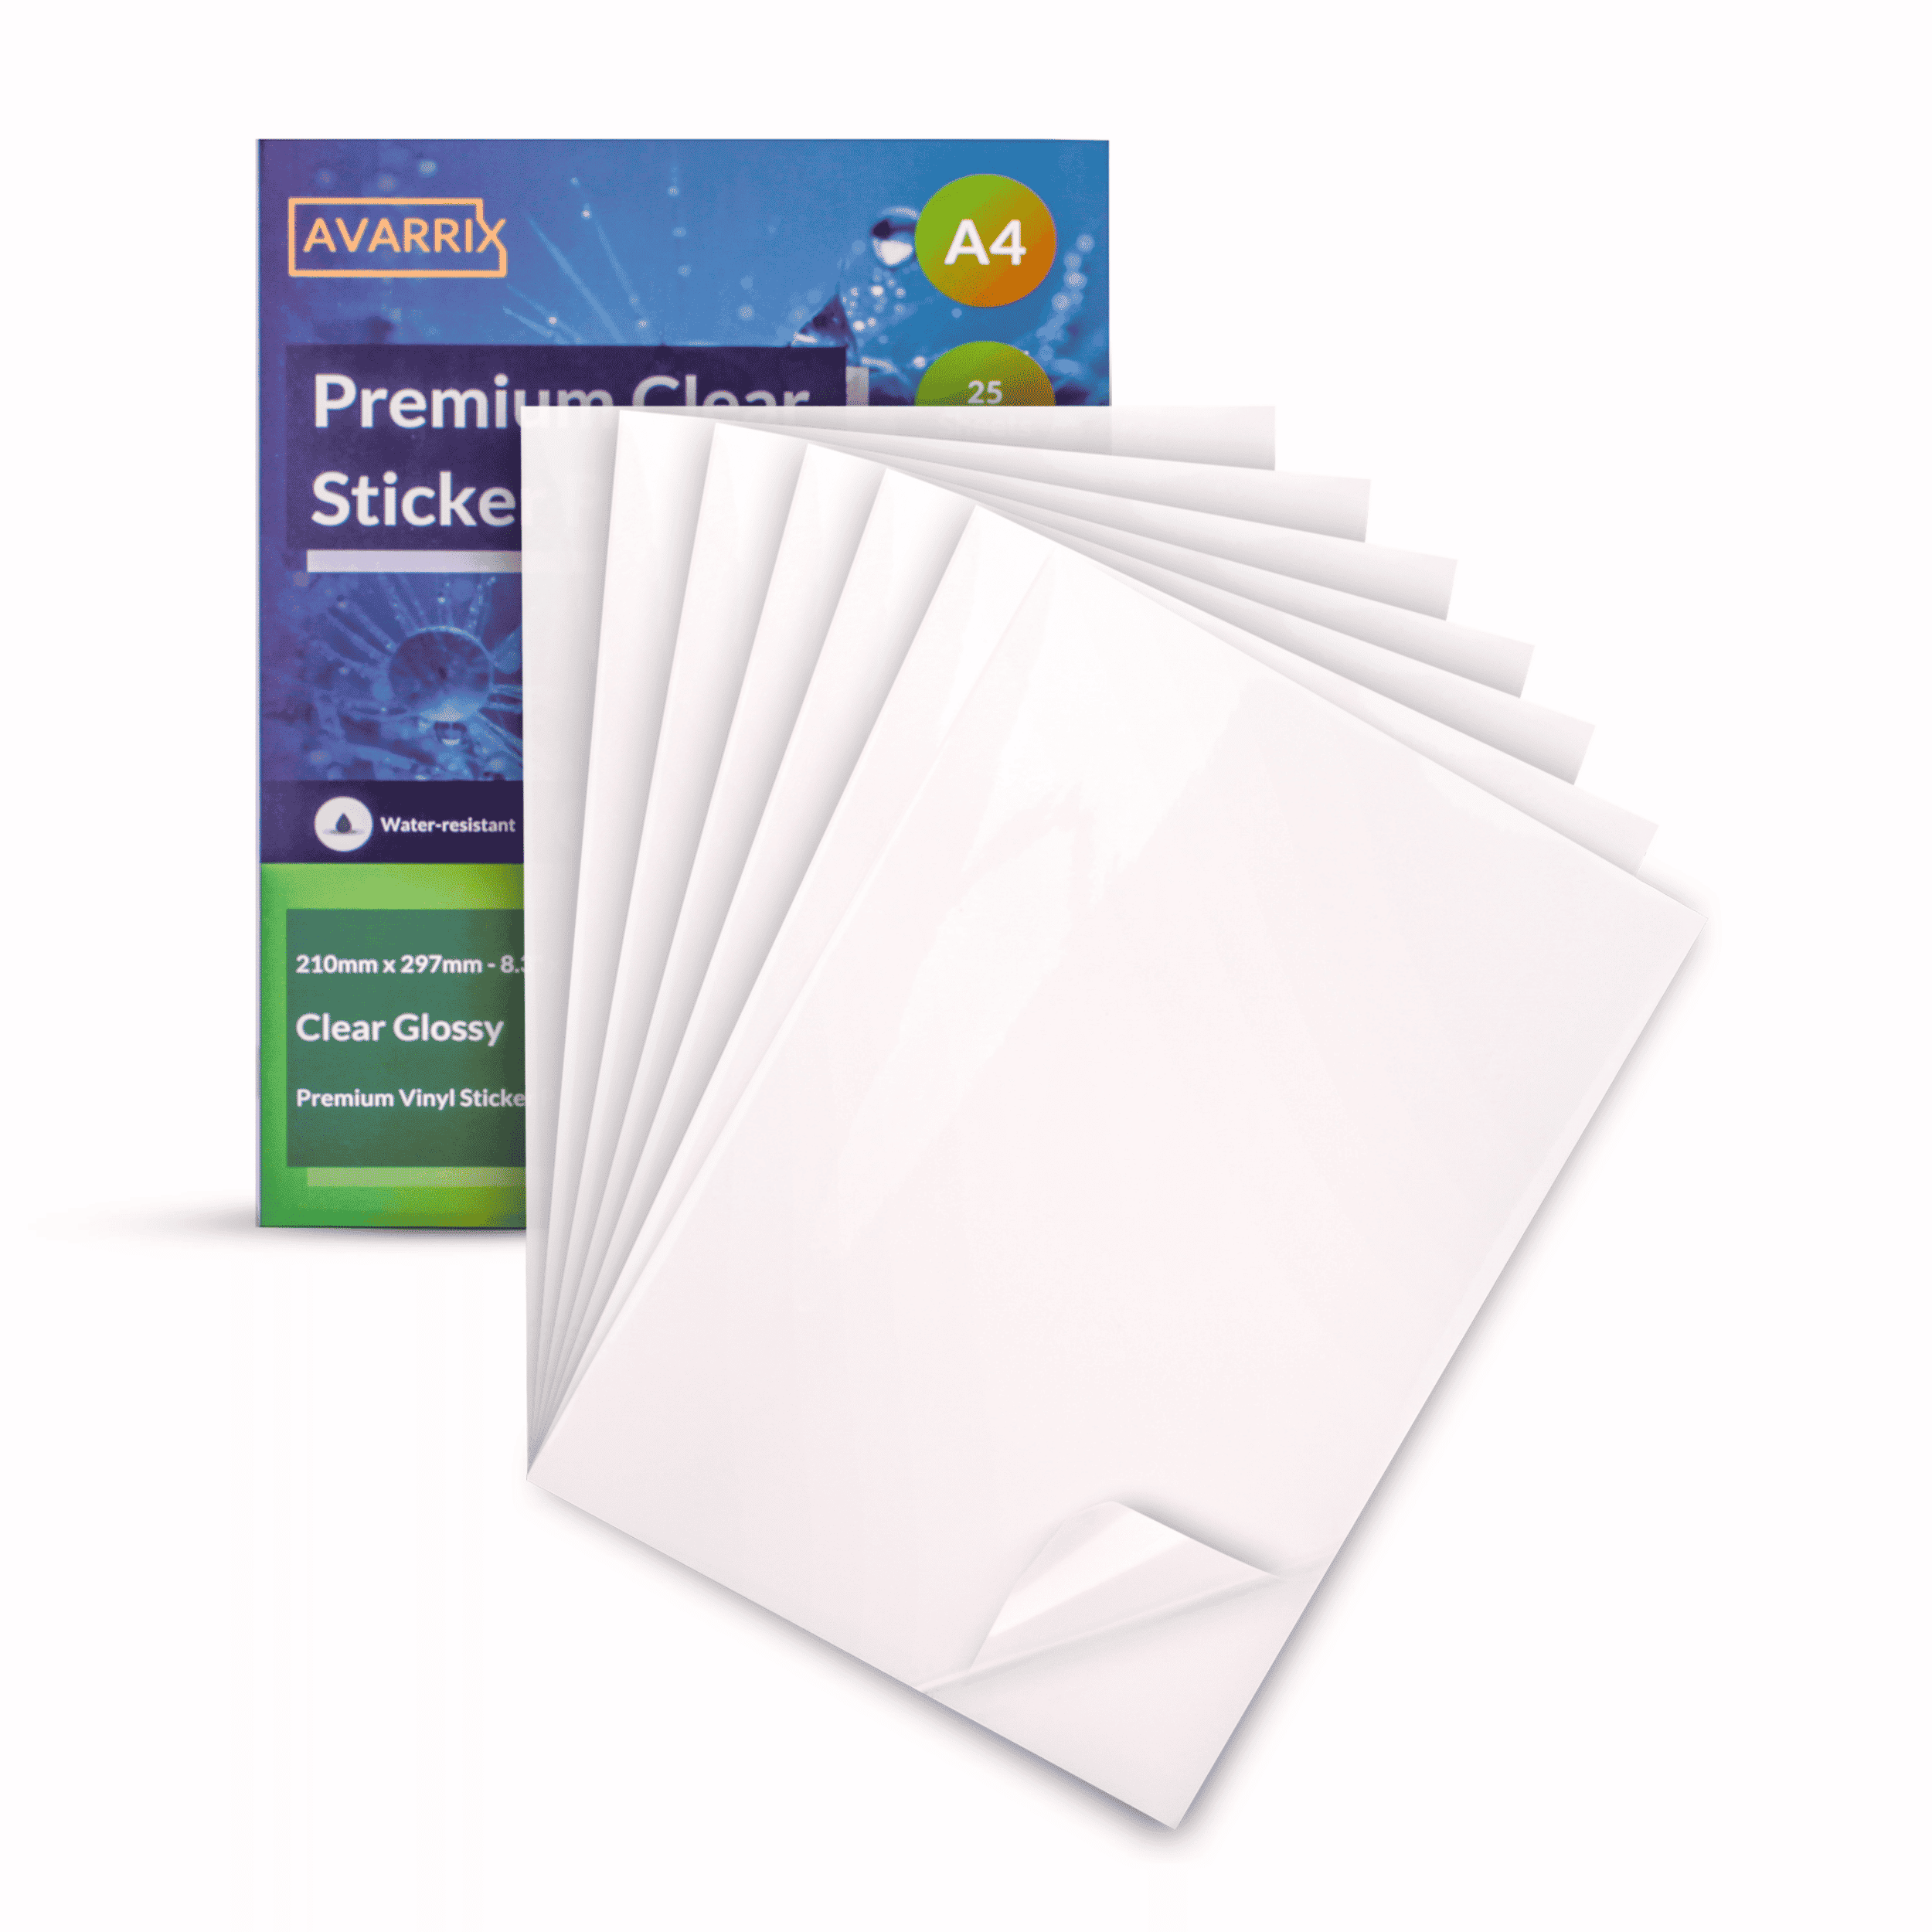 A4 Size Semi Clear Printable Vinyl for Crafting 30 Paper Sheets per Pack  Compatible with Ink-jet Printer